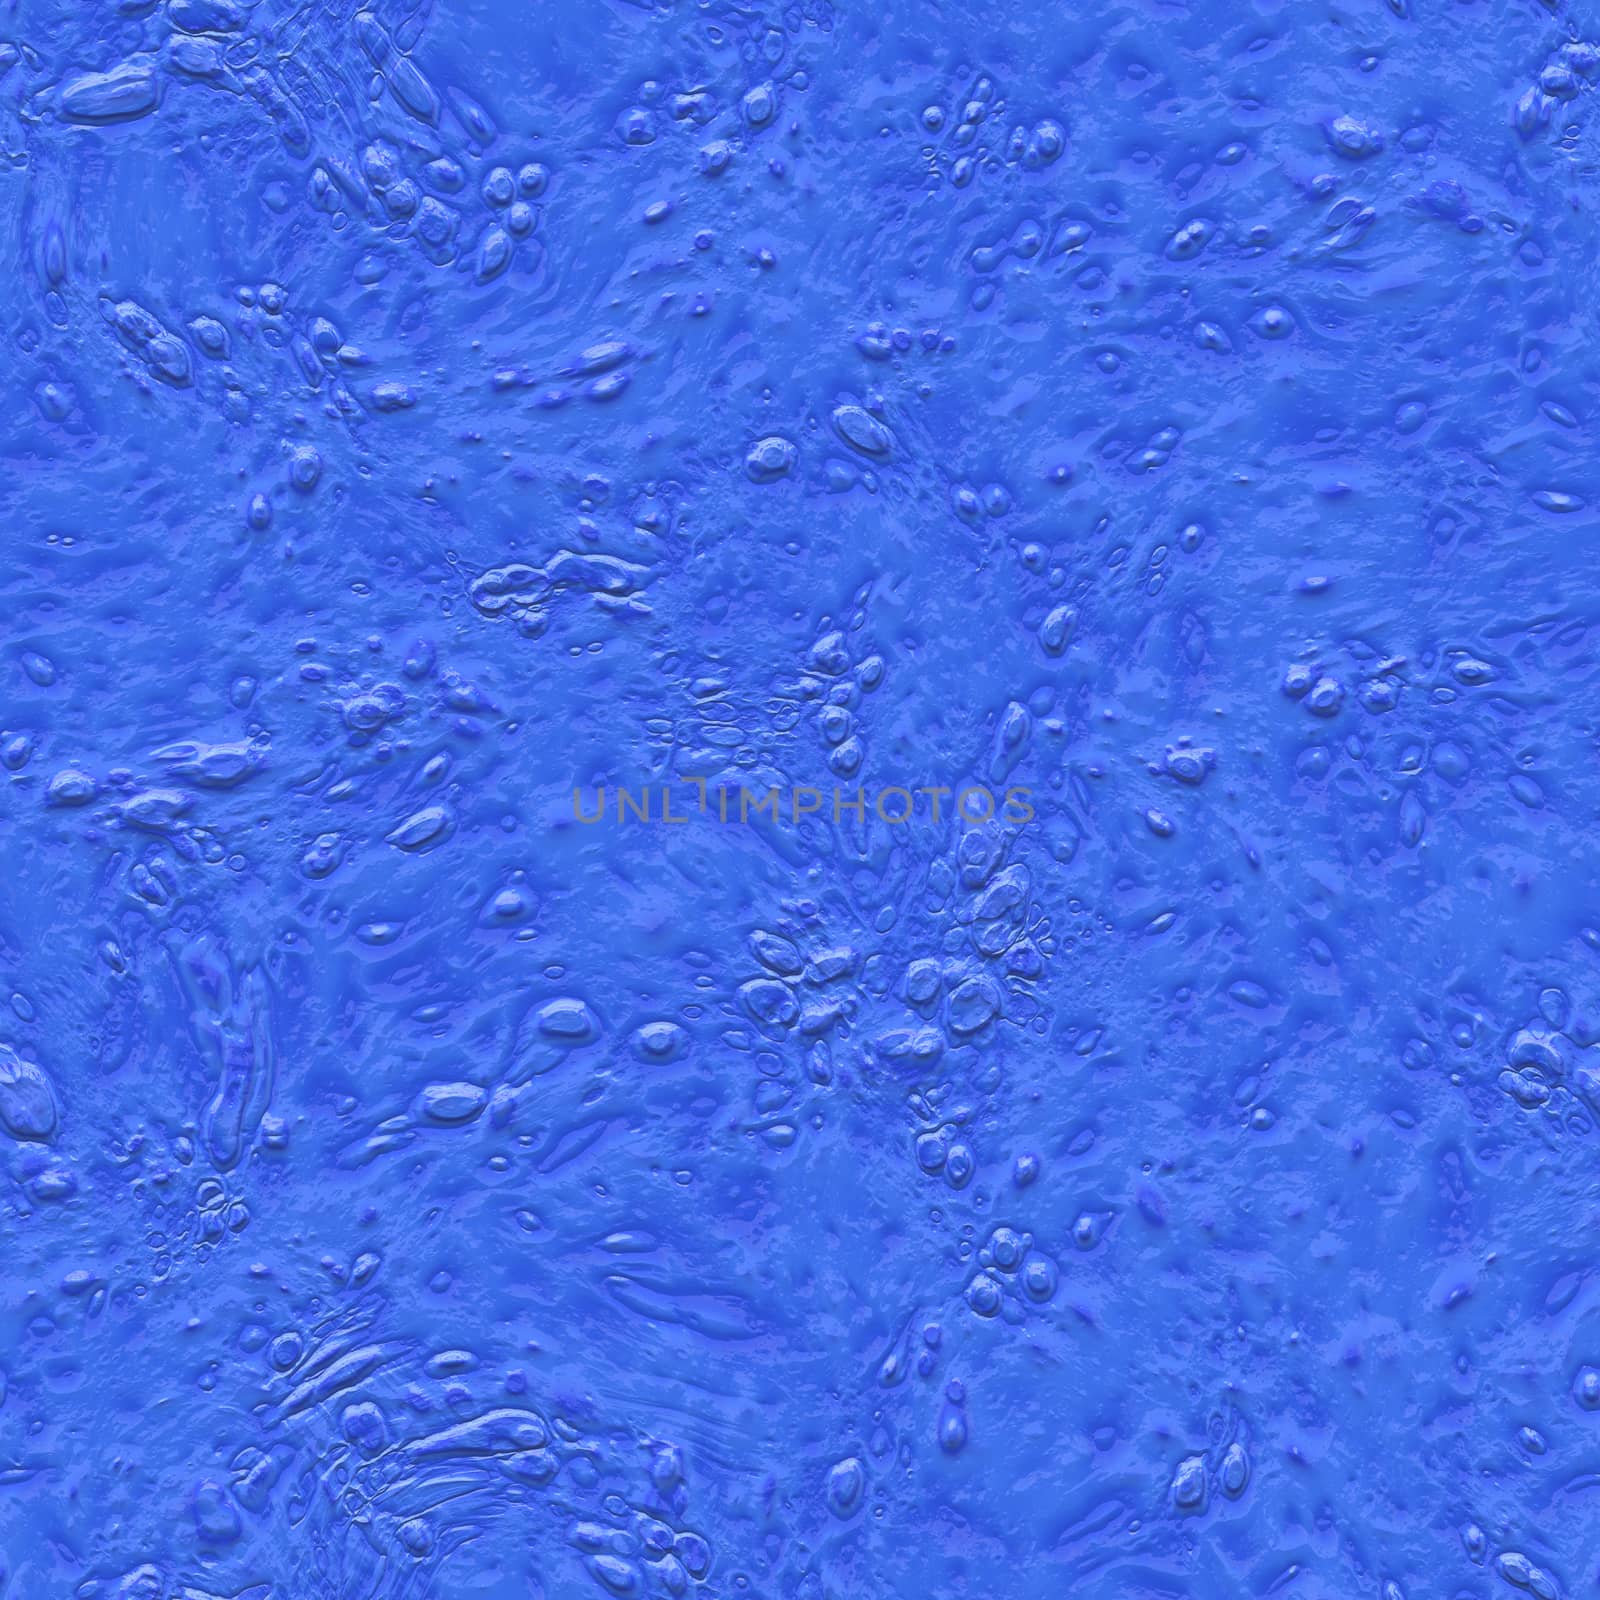 Illustration of a blue painted surface seamless texture